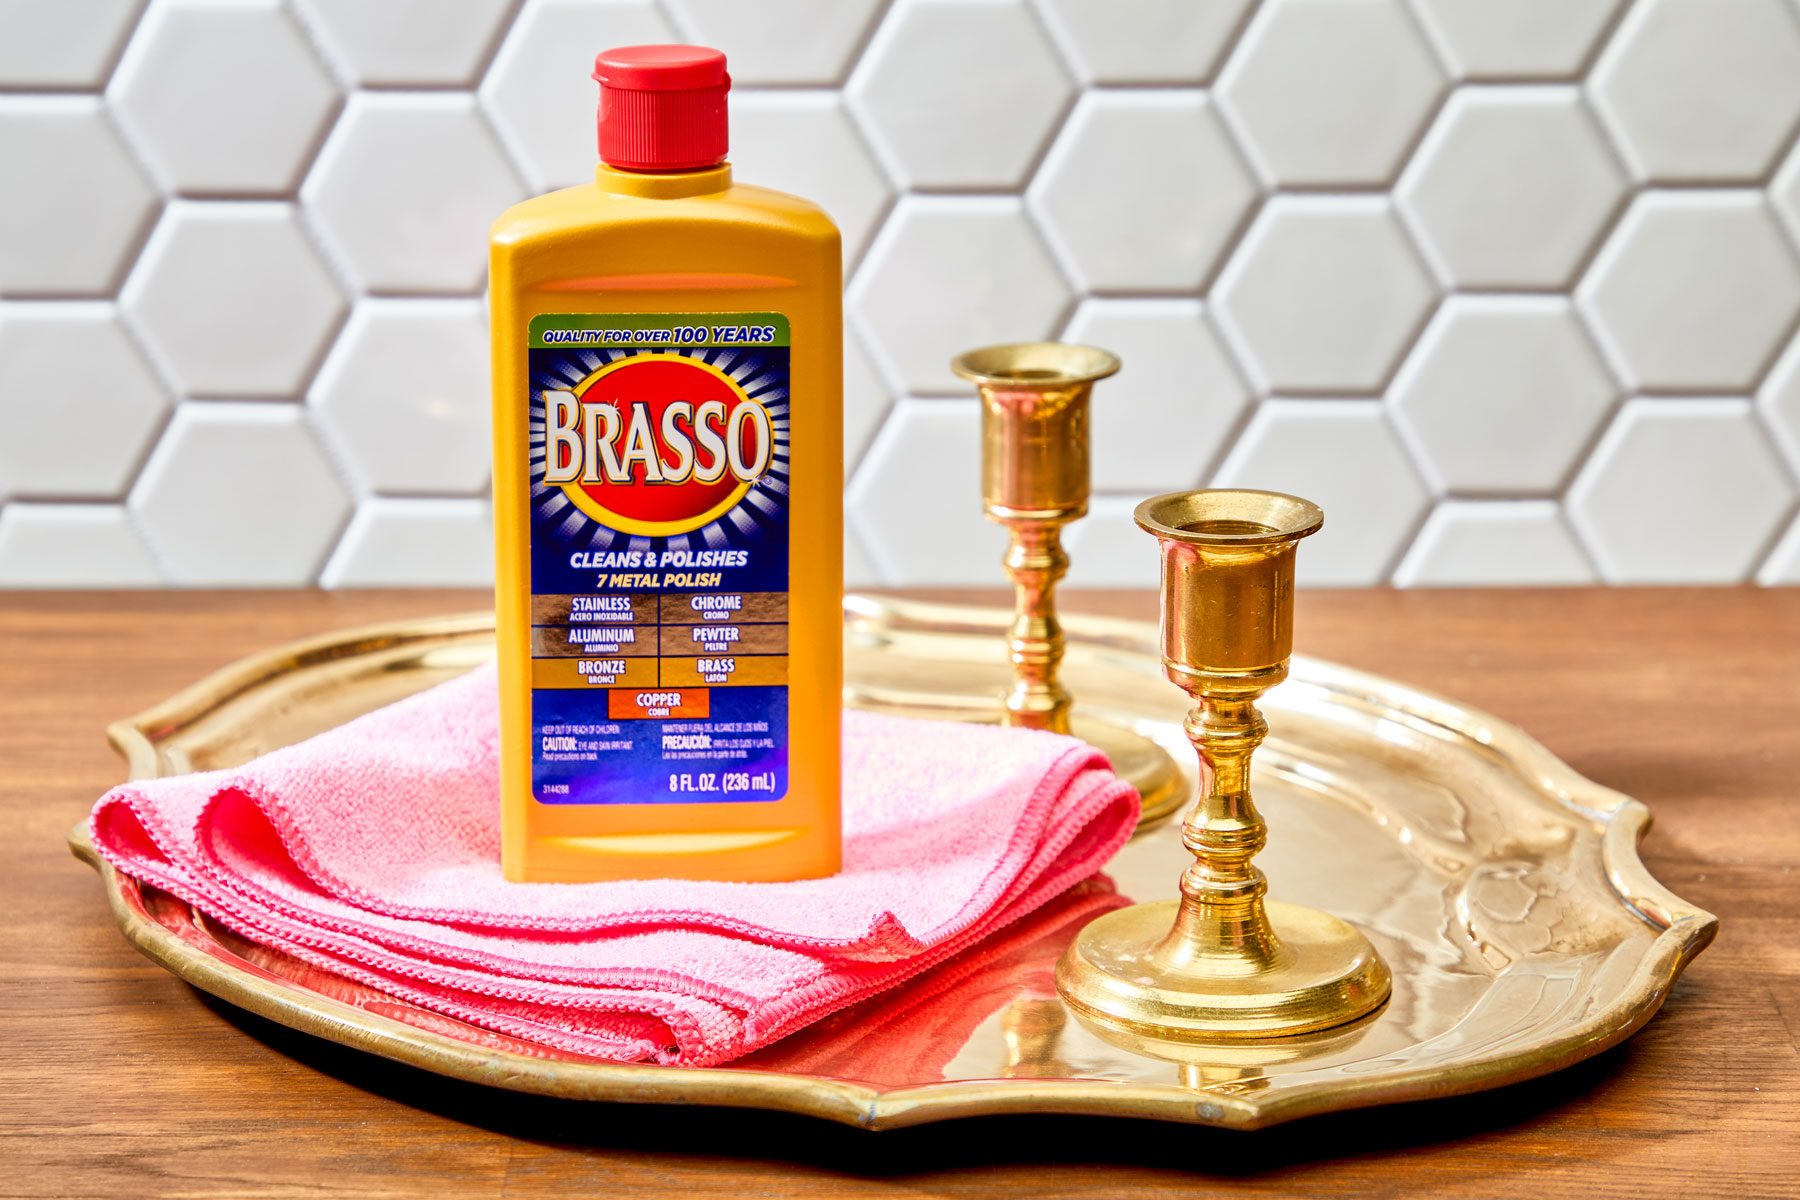 How to Clean Brass: 4 Ways to Clean Brass Hardware, Fixtures